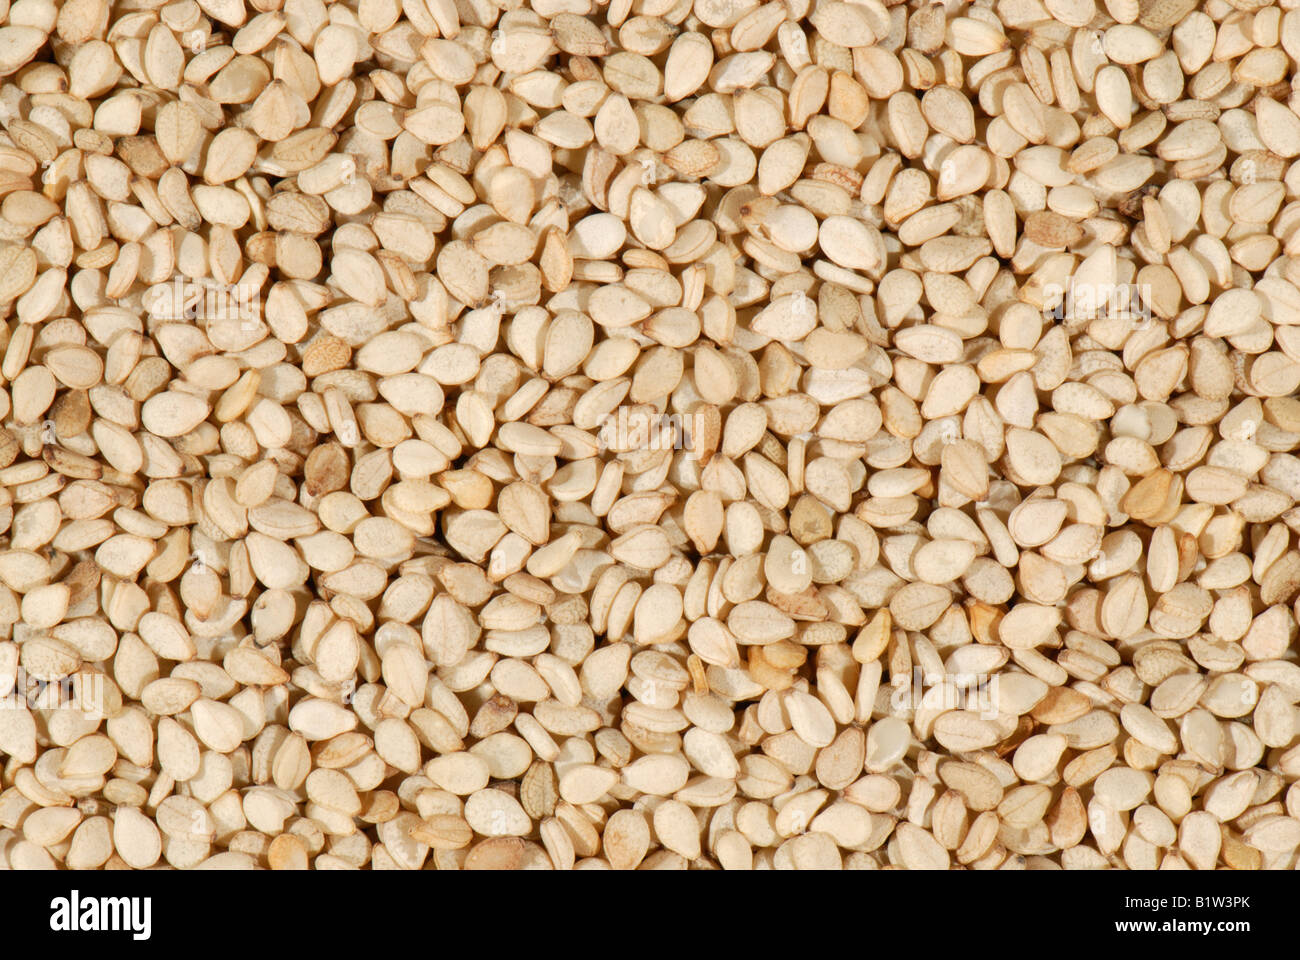 Organic sesame seeds a product of health food shops Stock Photo